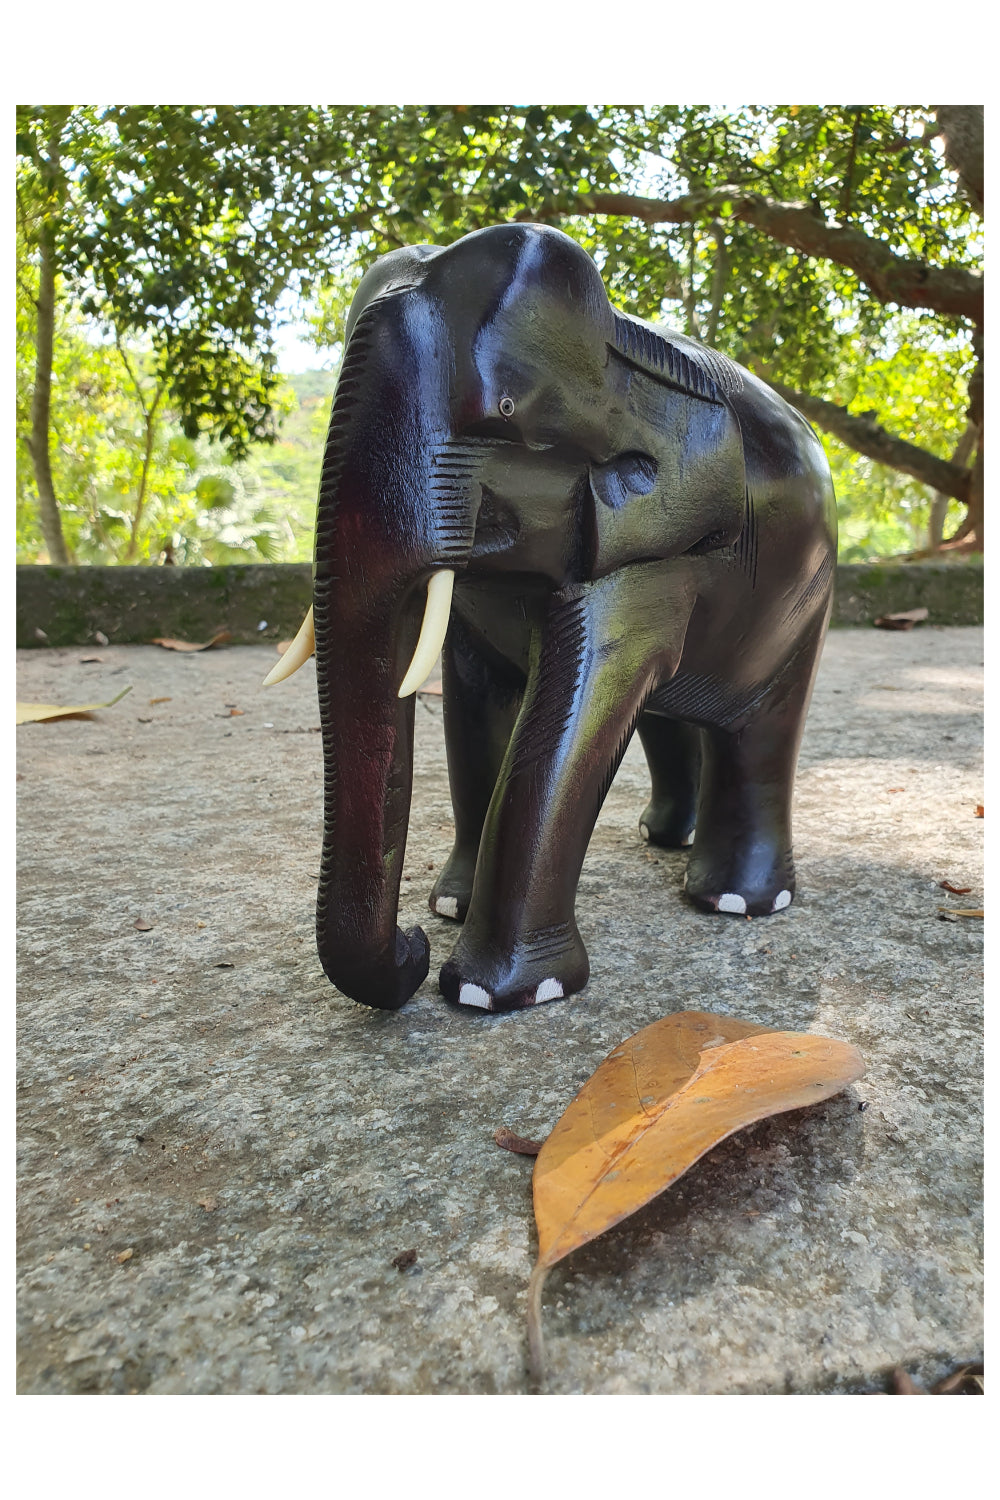 Southloom Handmade Elephant Handicraft (Carved from Mahogany Wood) 8 Inches